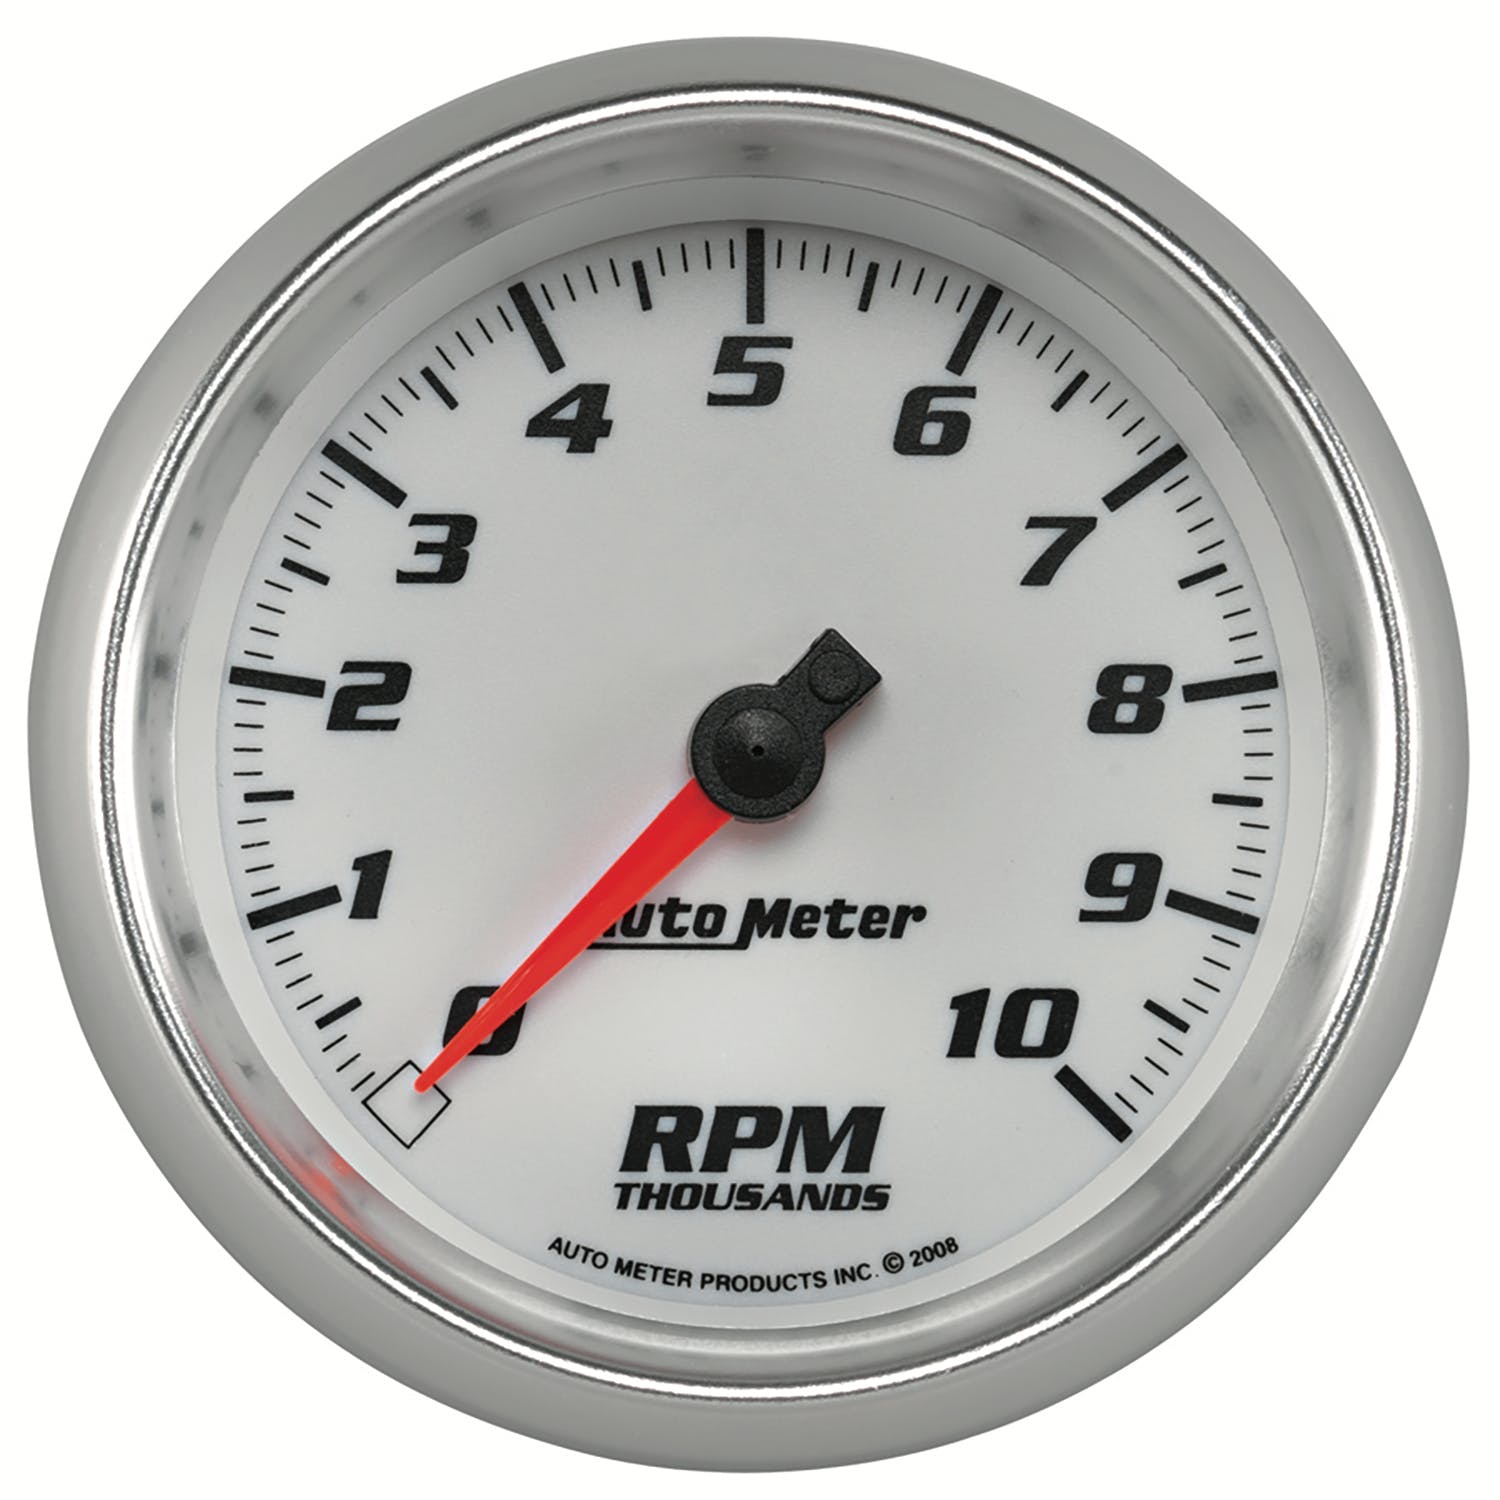 AutoMeter Products 19798 Tachometer Gauge, White-Pro Cycle 3 3/8, 10,000 RPM